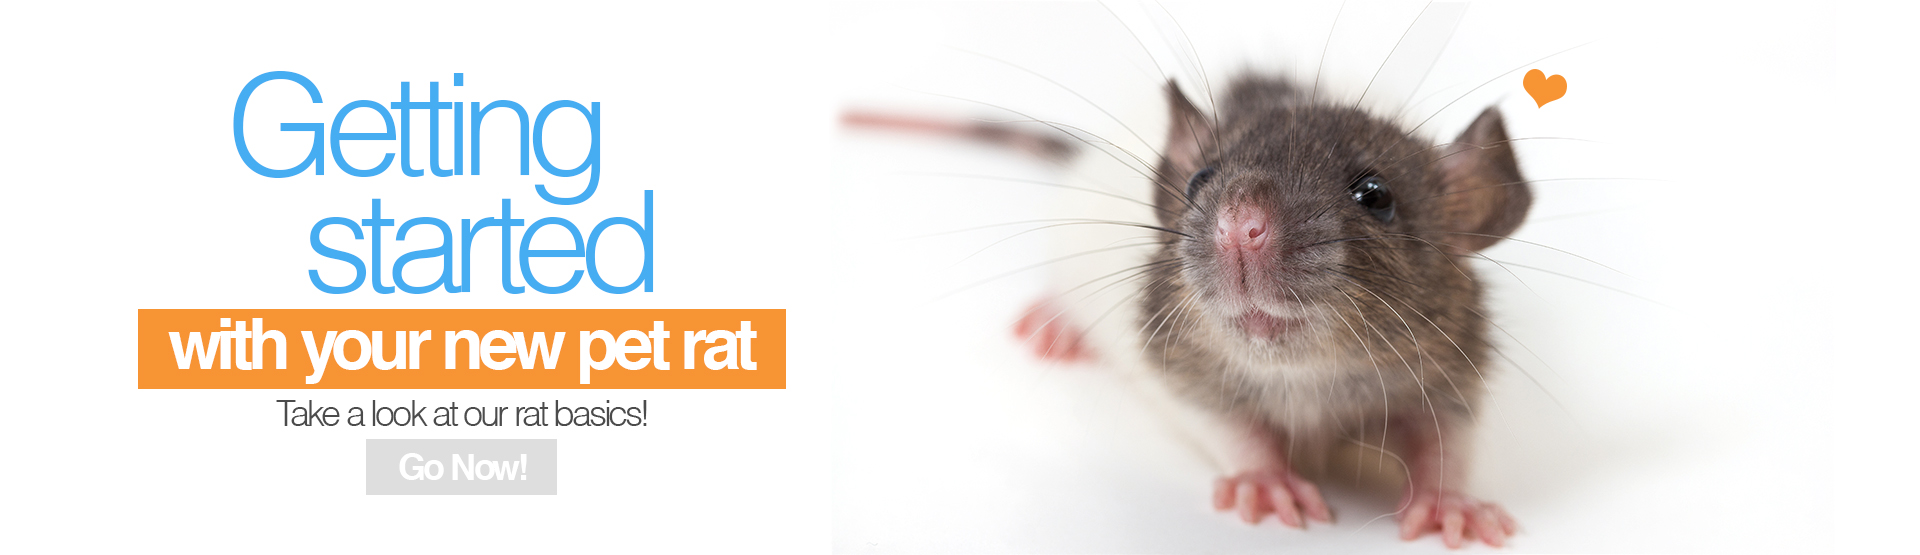 Getting started with your new pet rat